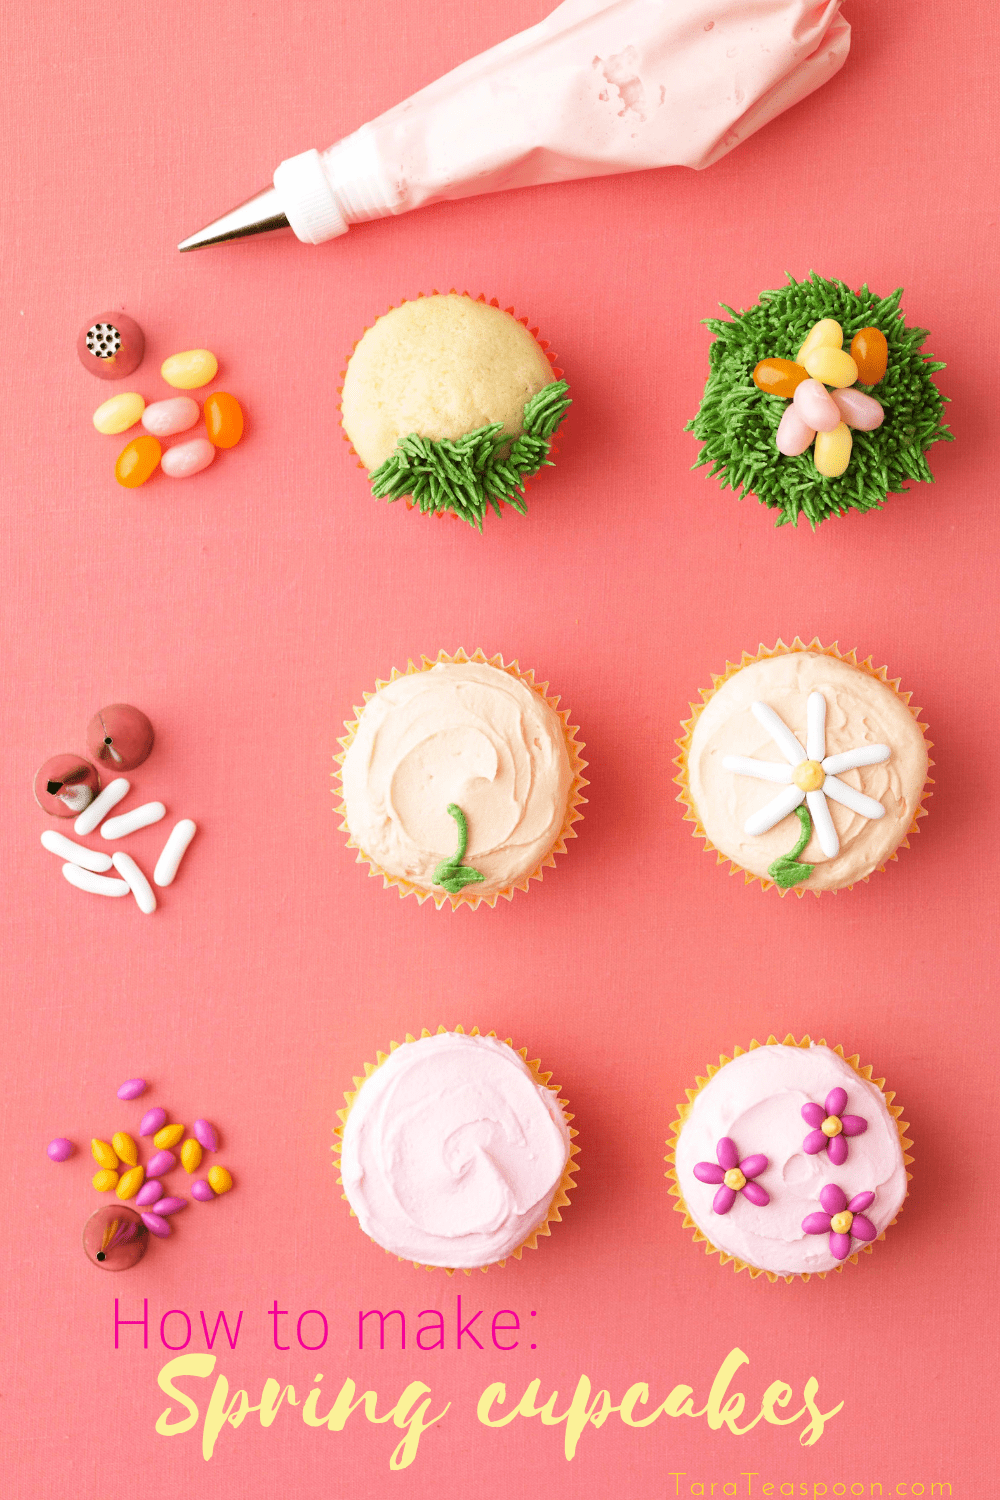 How to spring cupcakes pin